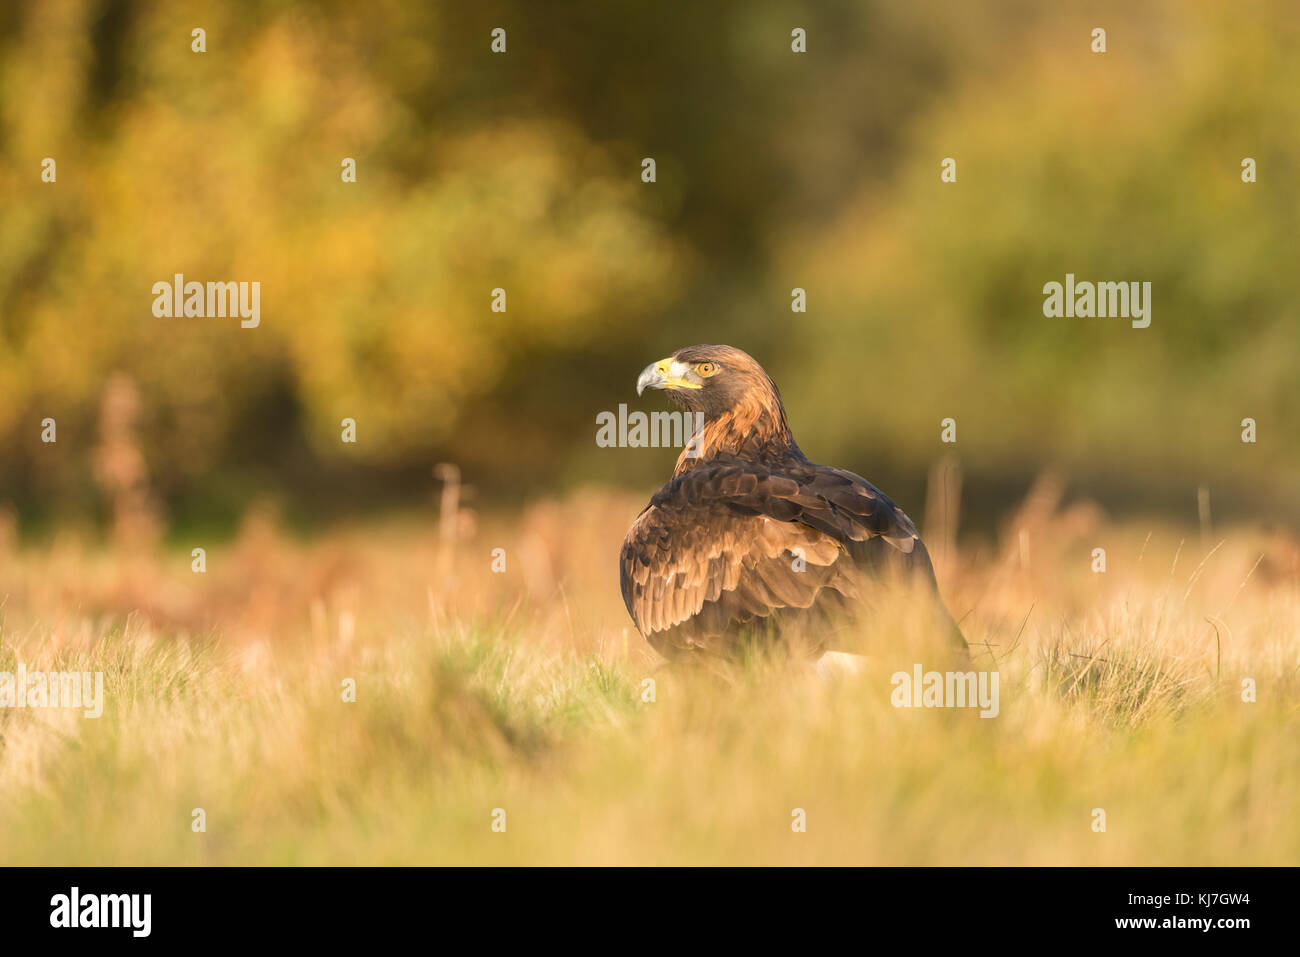 Golden eagle,  Aquila chrysaetosin low ,late Autumnal light,close up, showing detail of head and neck Stock Photo